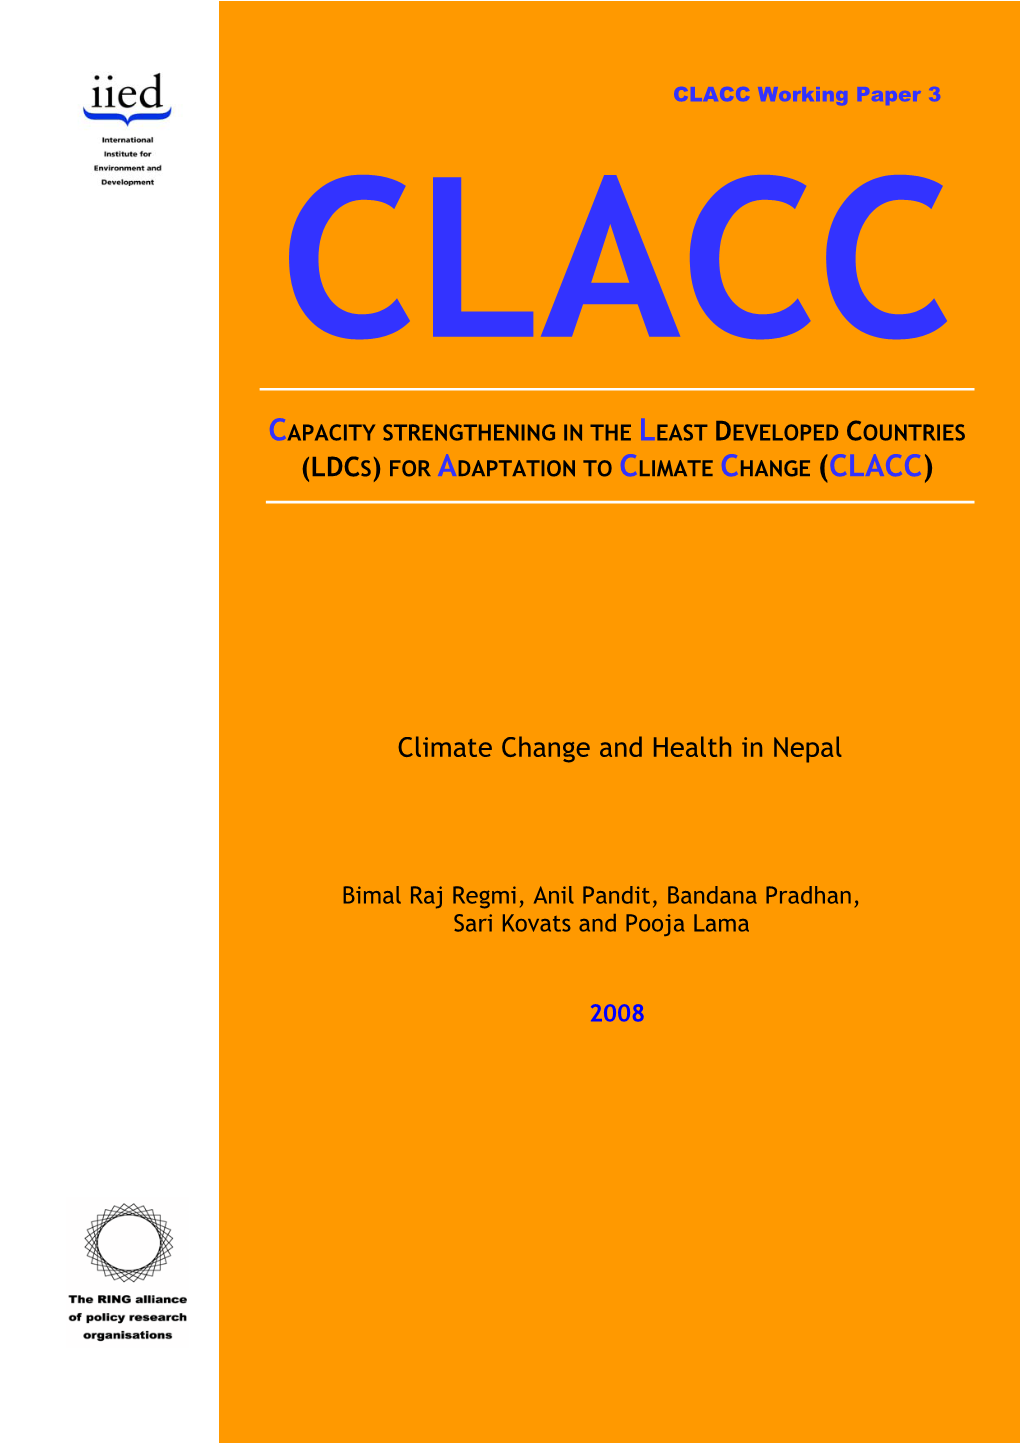 (CLACC) Climate Change and Health in Nepal